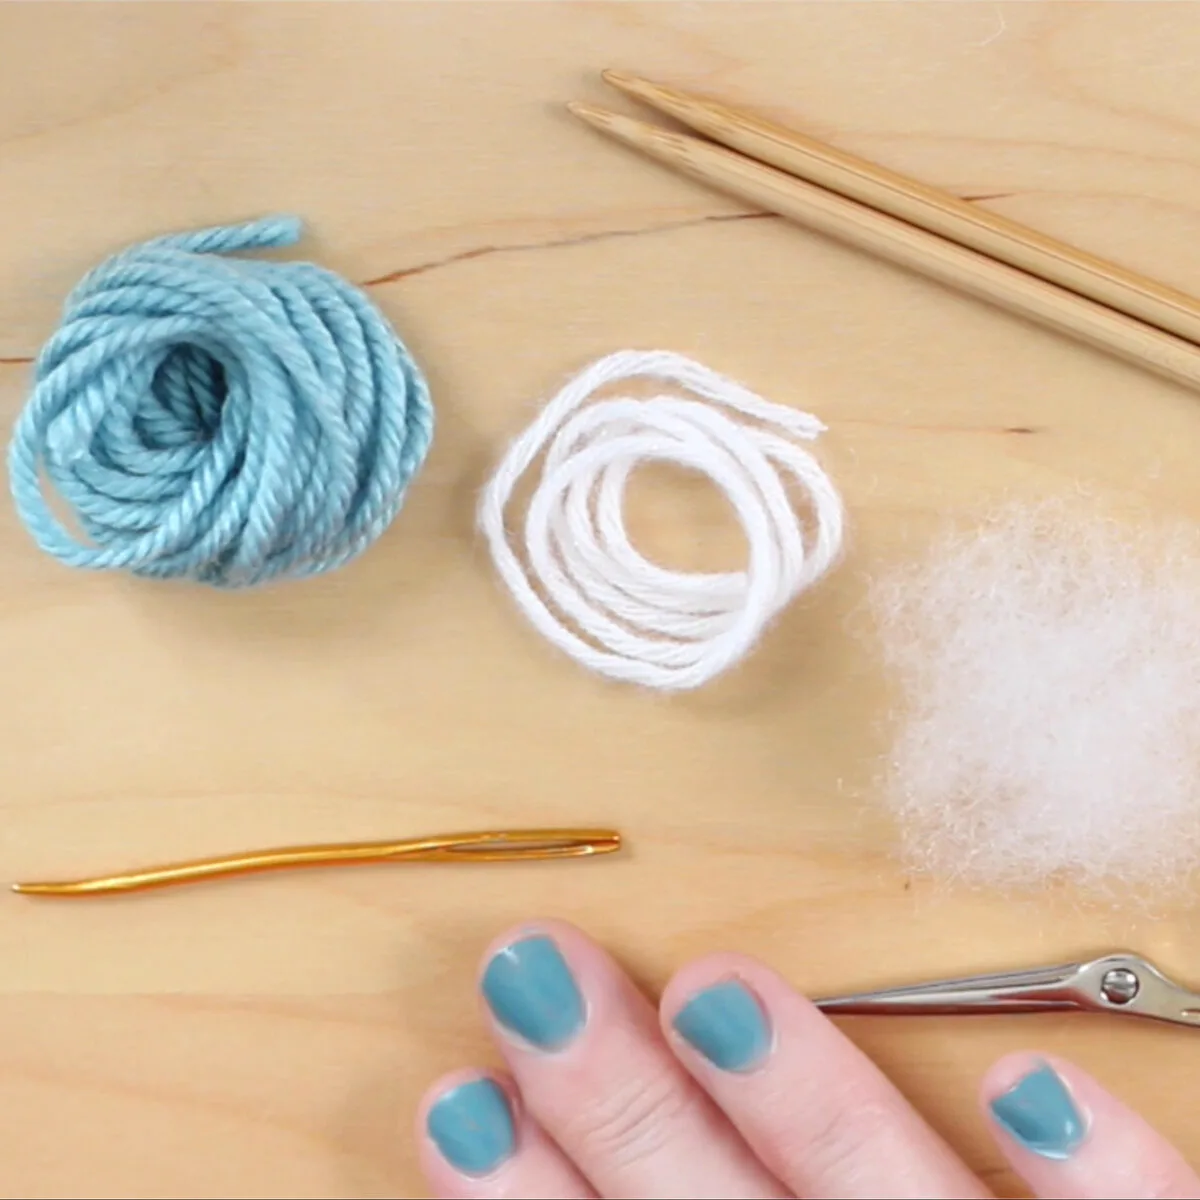 Knitting supplies of light blue yarn color, knitting needles, scissors, and a tapestry needle.